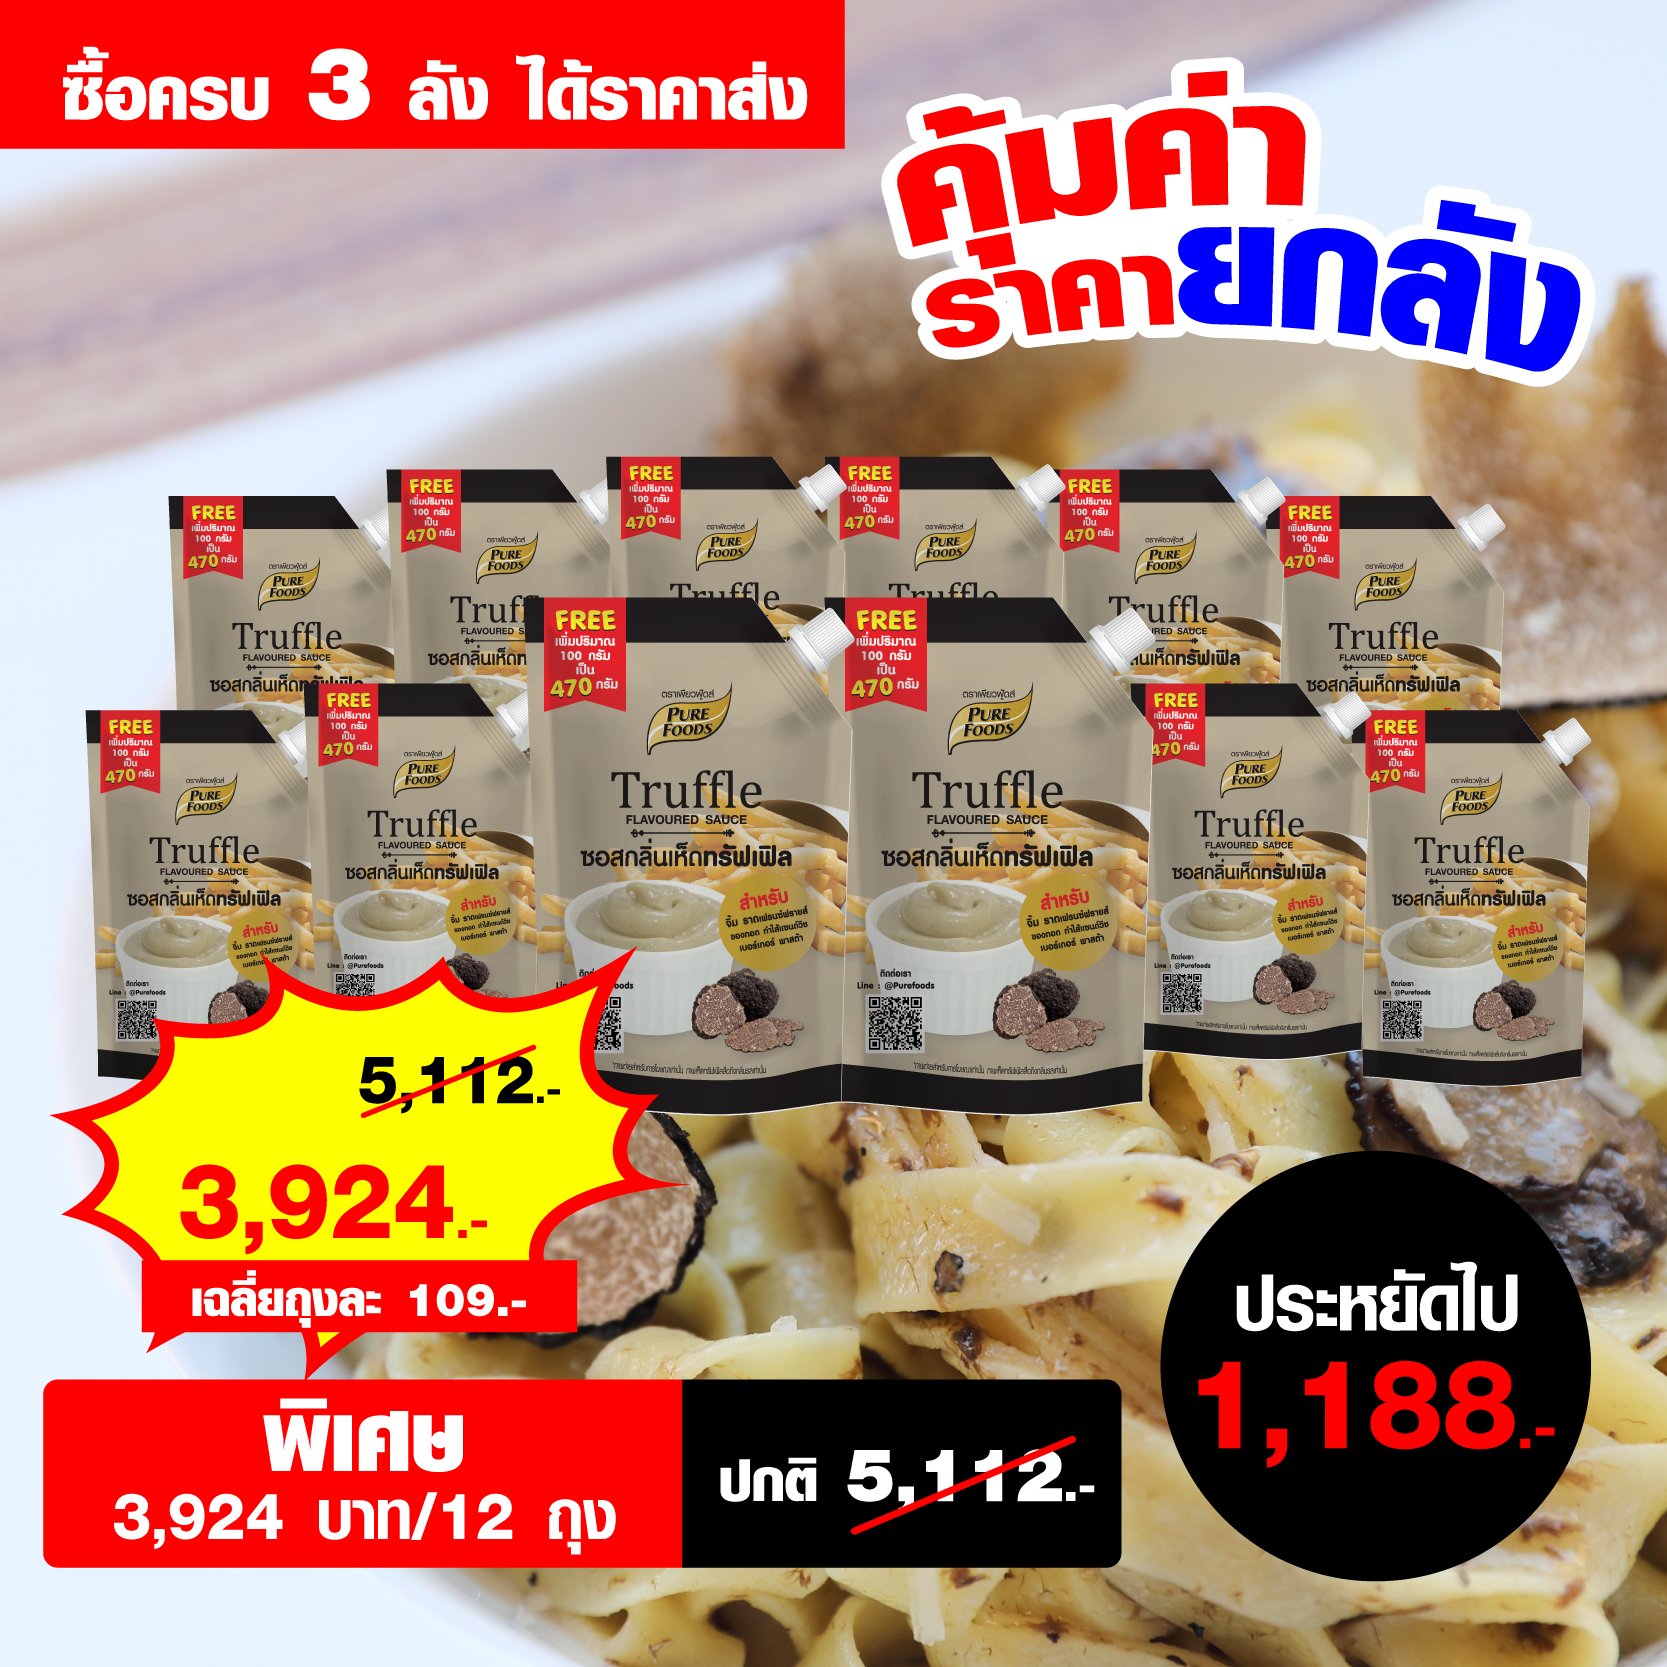 Truffle flavored sauce 370 g.